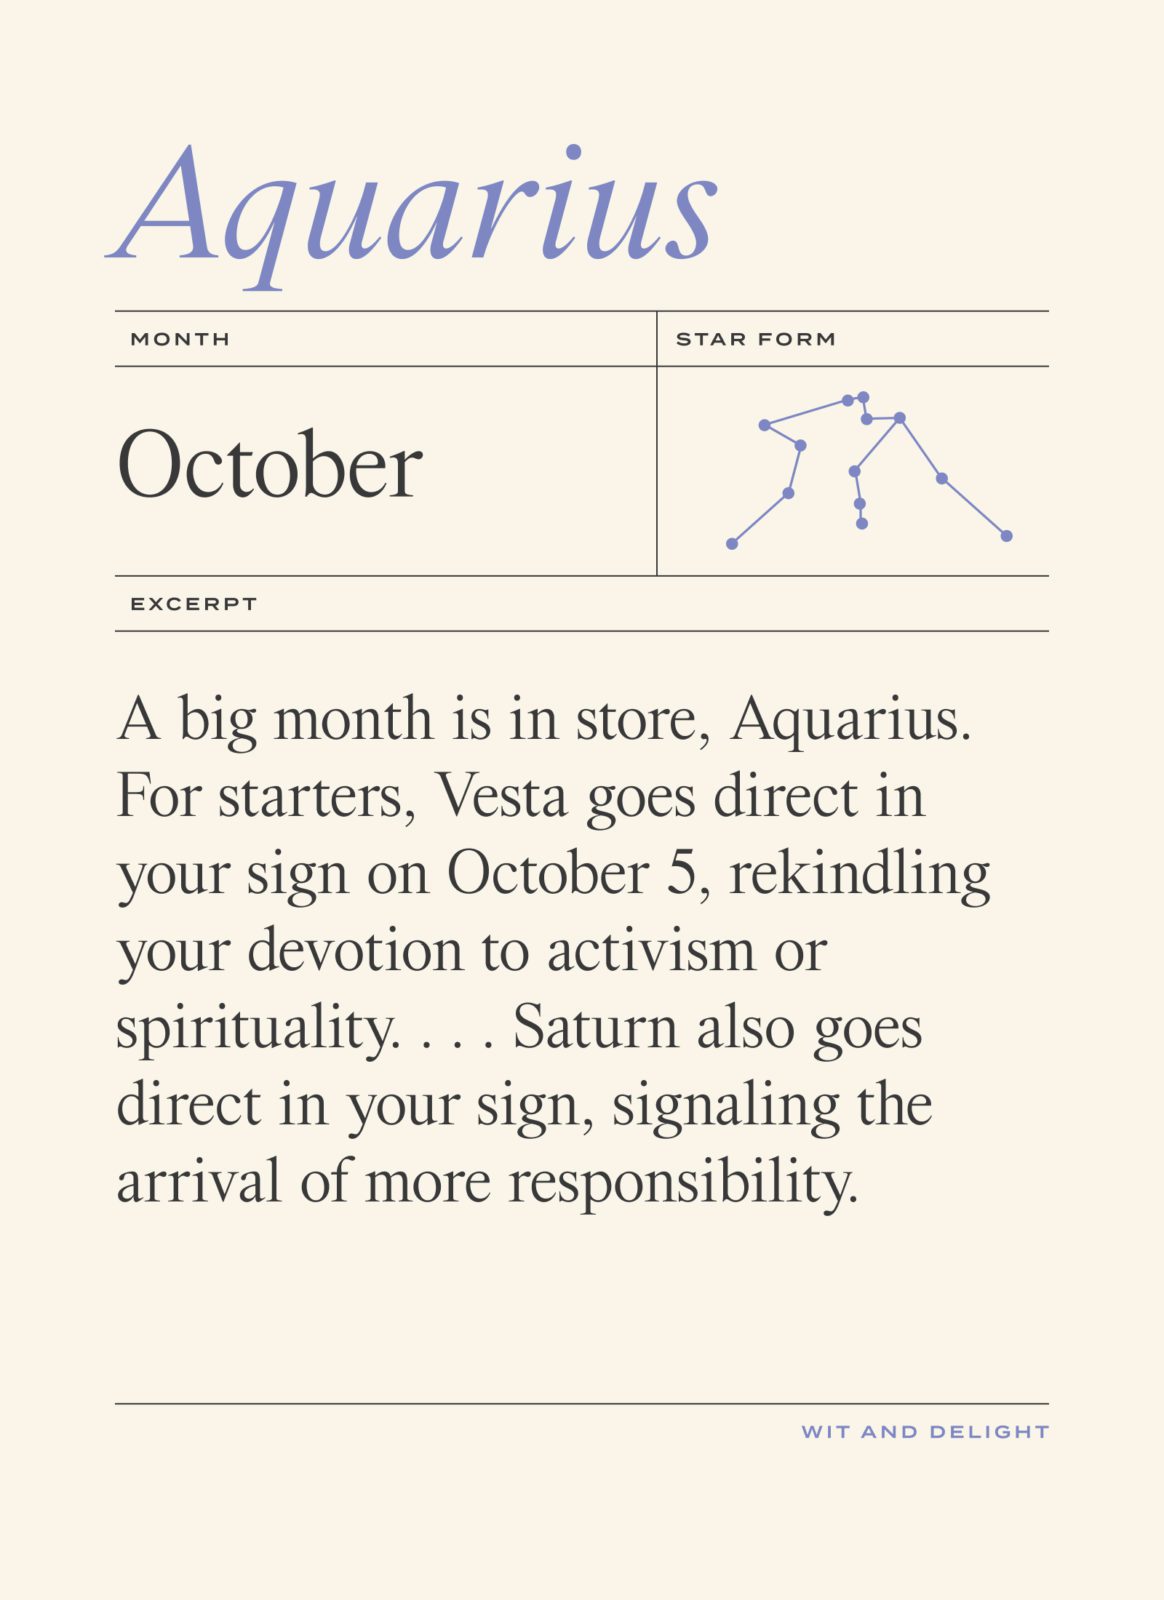 October Horoscopes: A Life-Changing Month | Wit & Delight